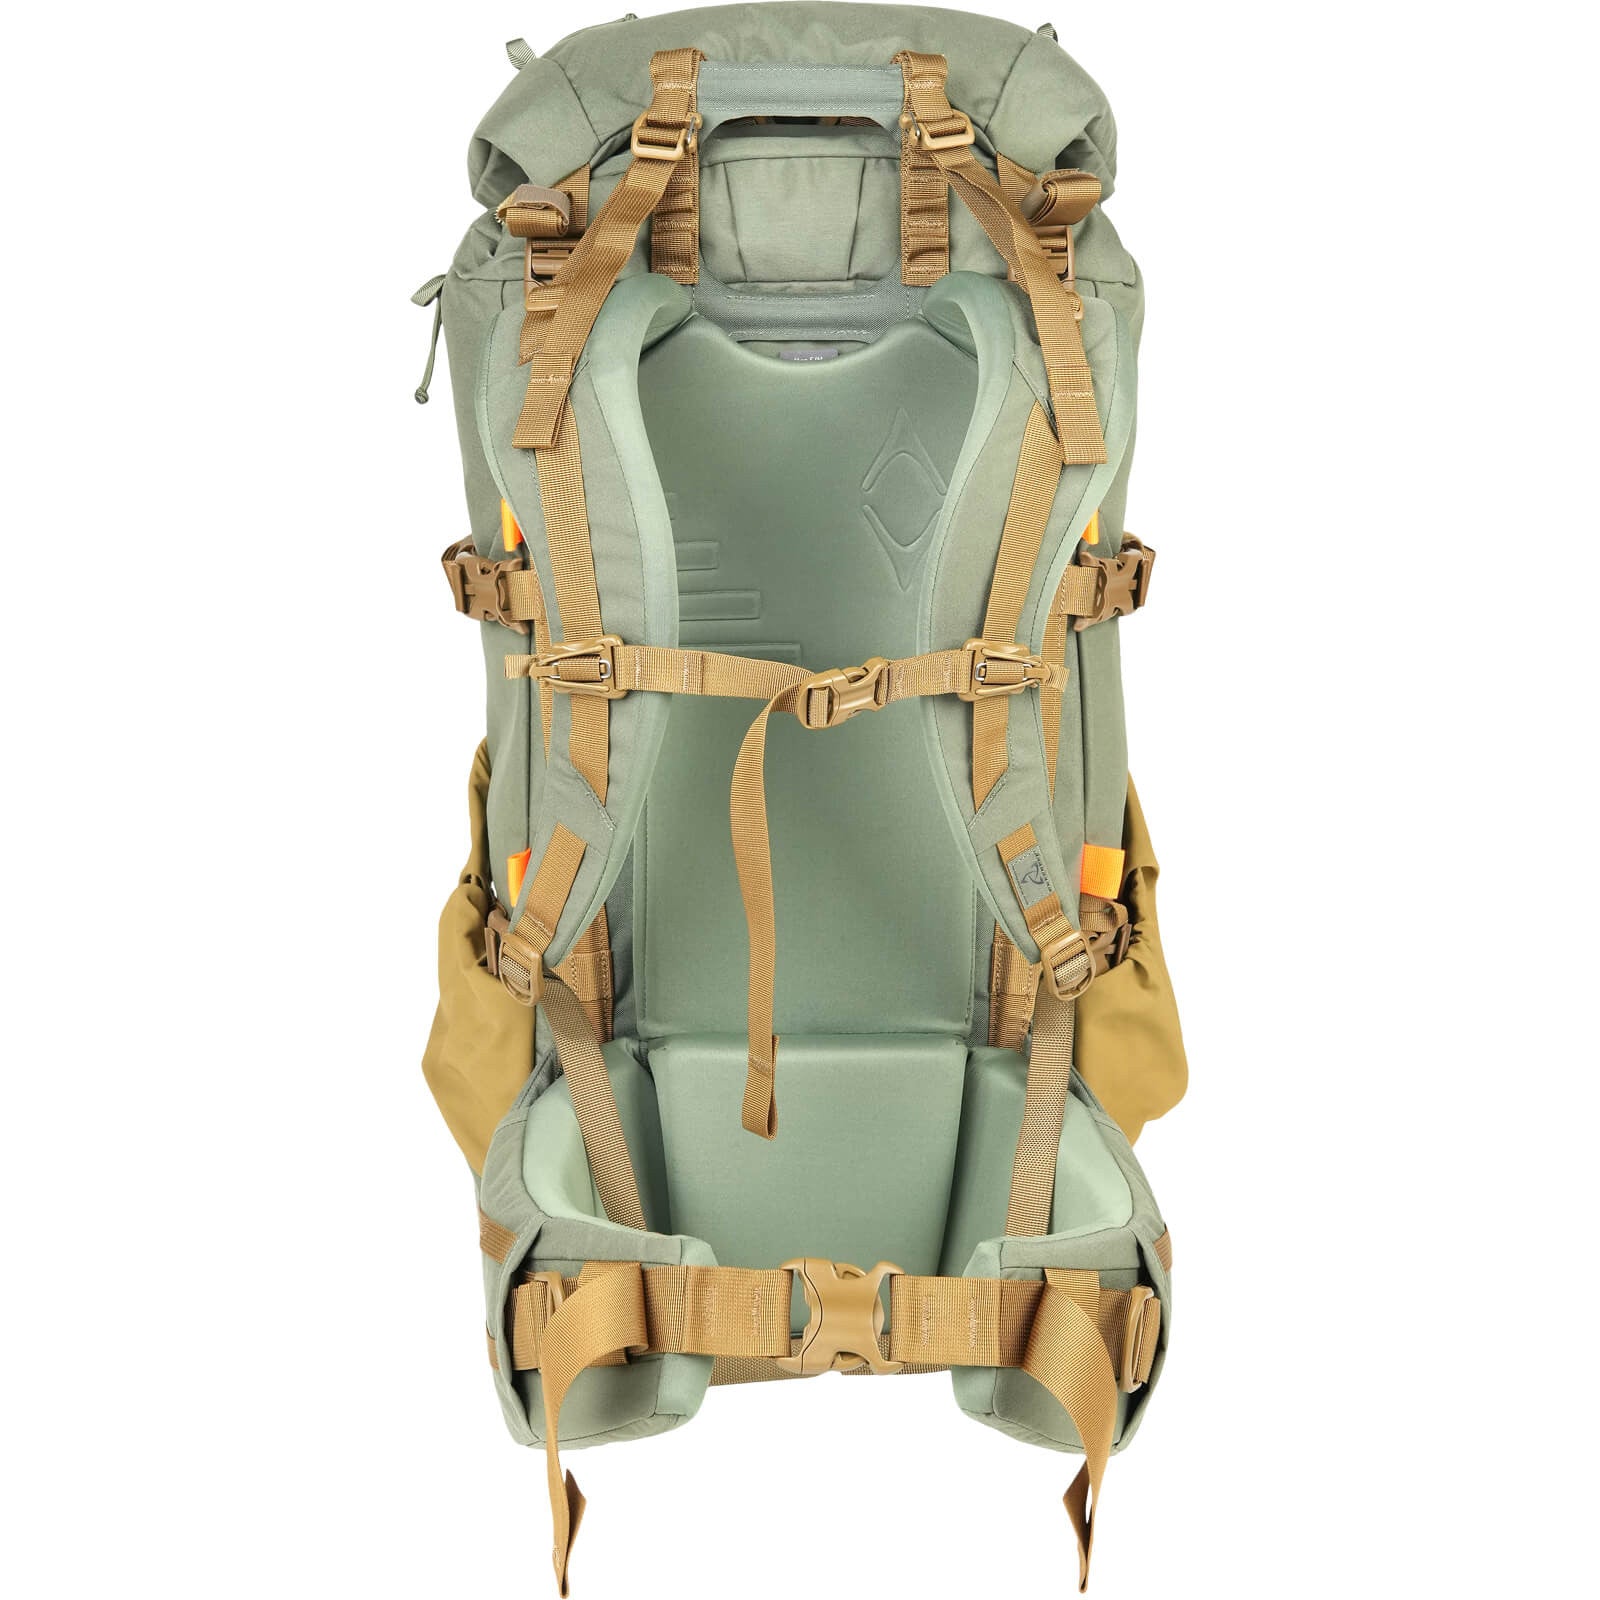 Metcalf 50 Men's S24 Backpack -  - Mansfield Hunting & Fishing - Products to prepare for Corona Virus